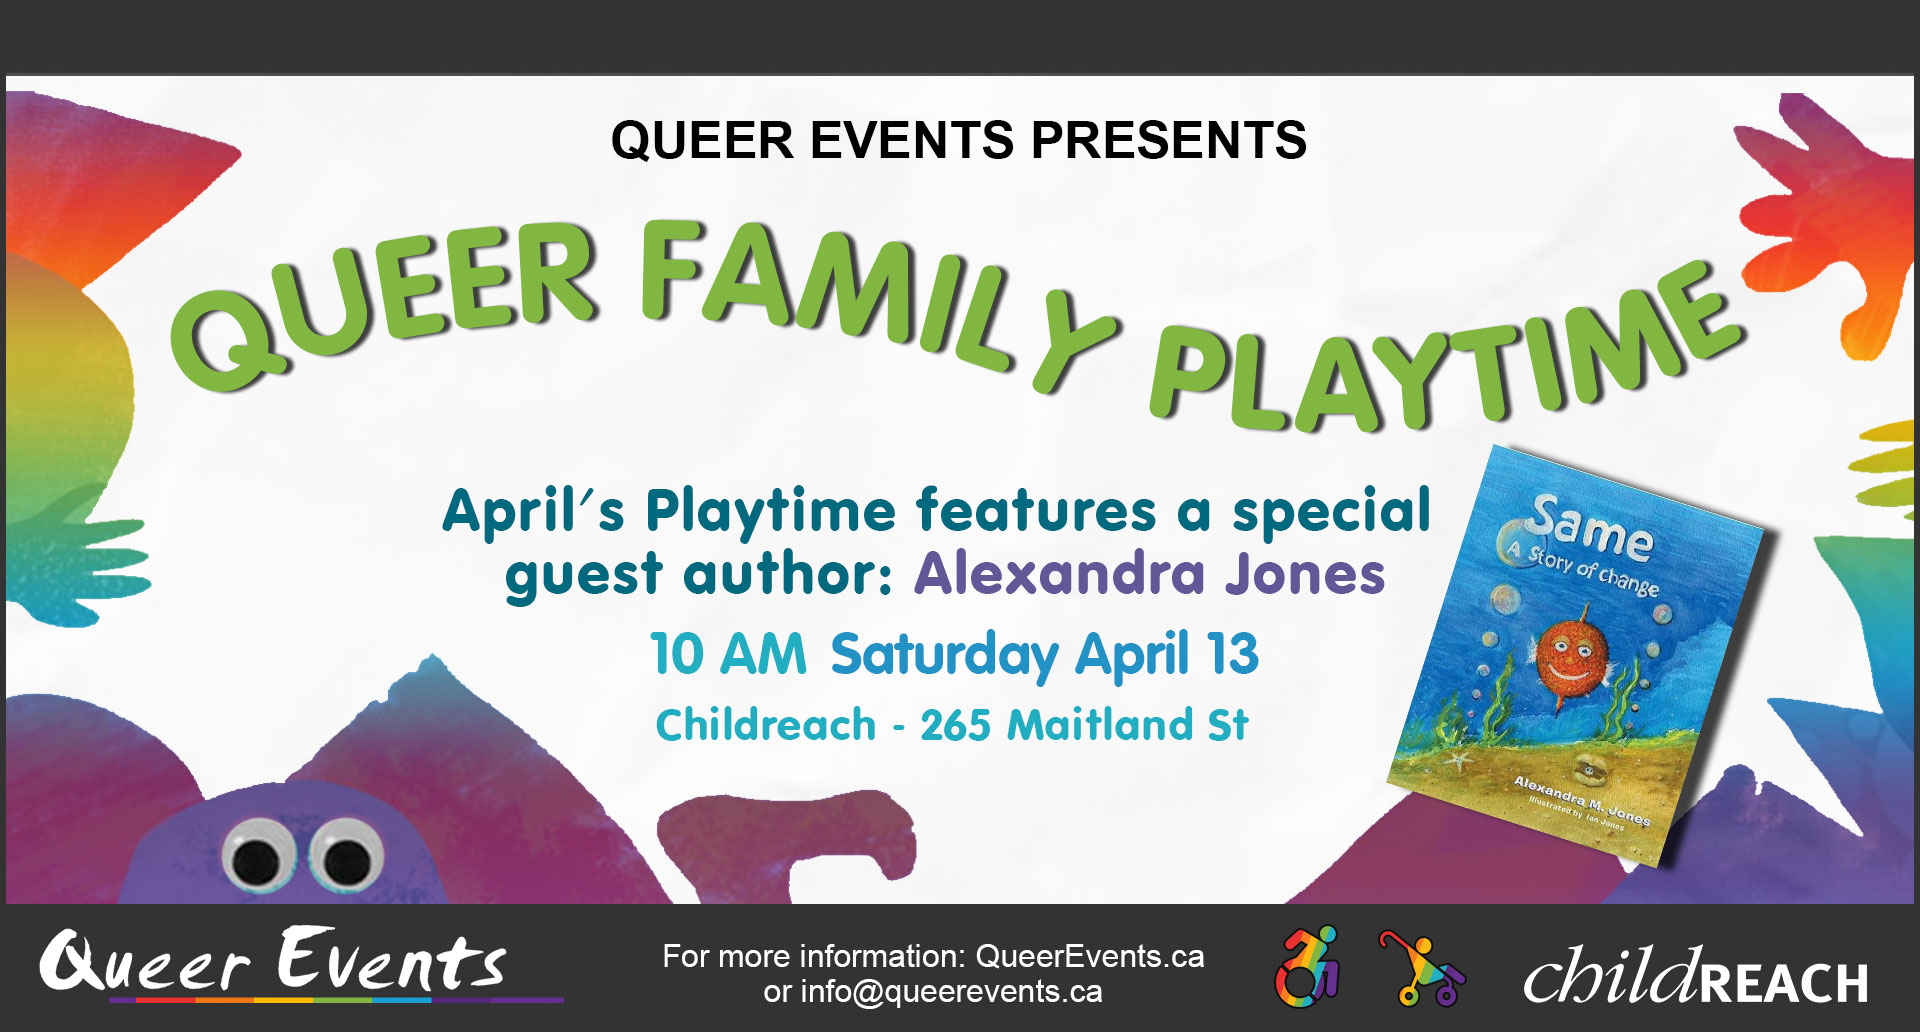 QueerEvents.ca - London event listing - Queer family playtime - april banner